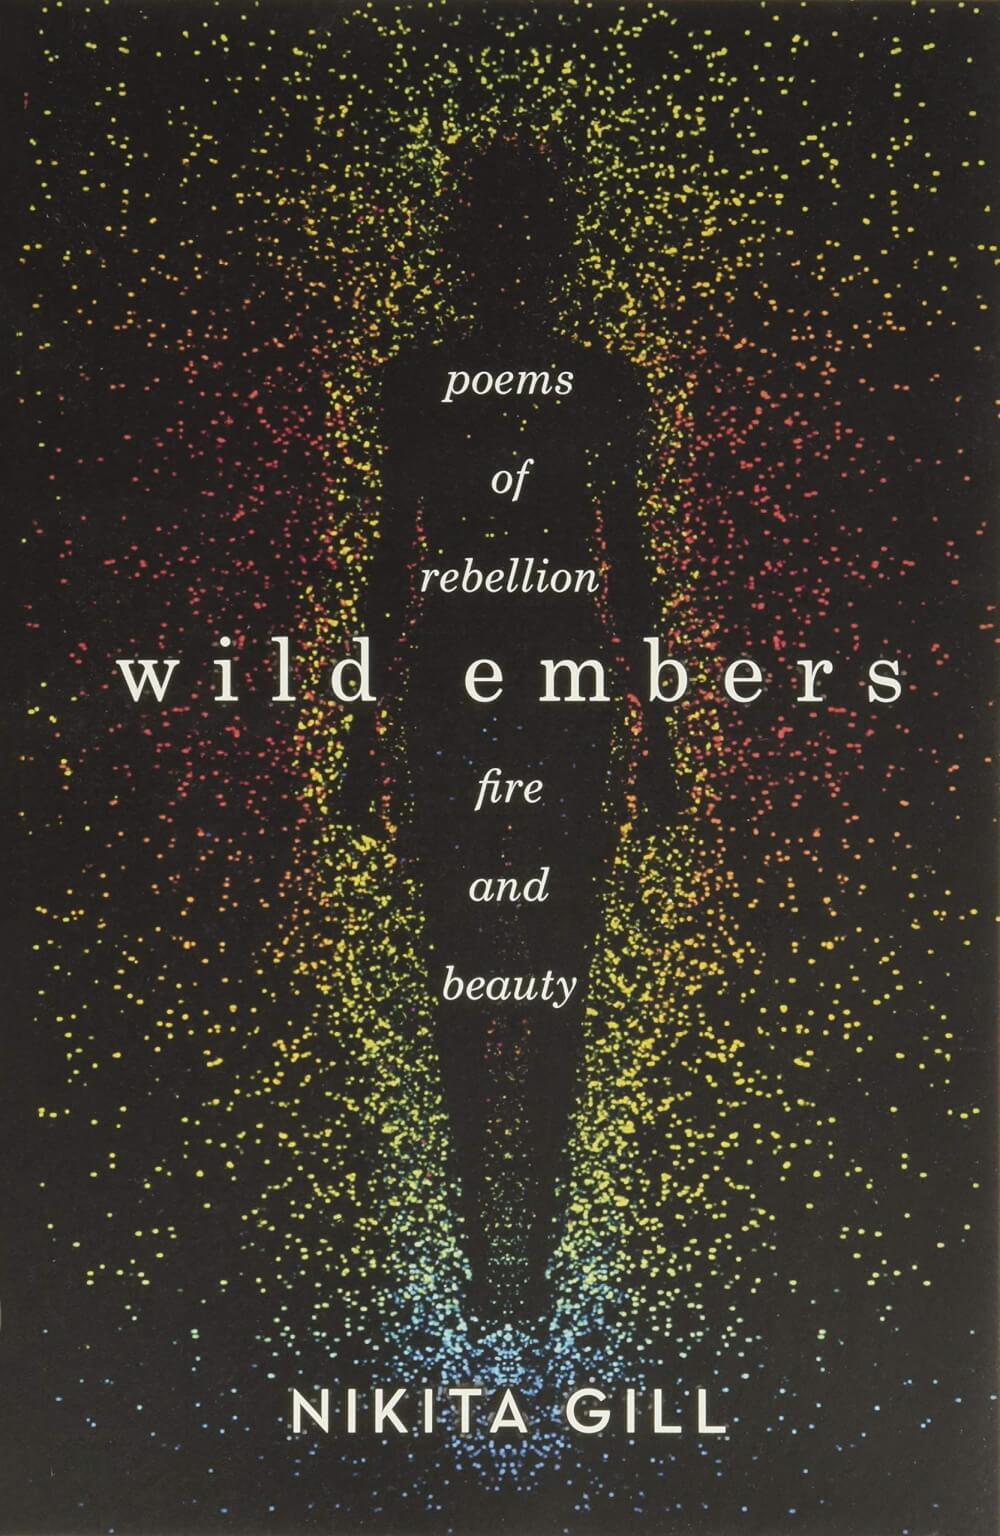 Post thumbnail for wild embers // poems of rebellion, fire & beauty